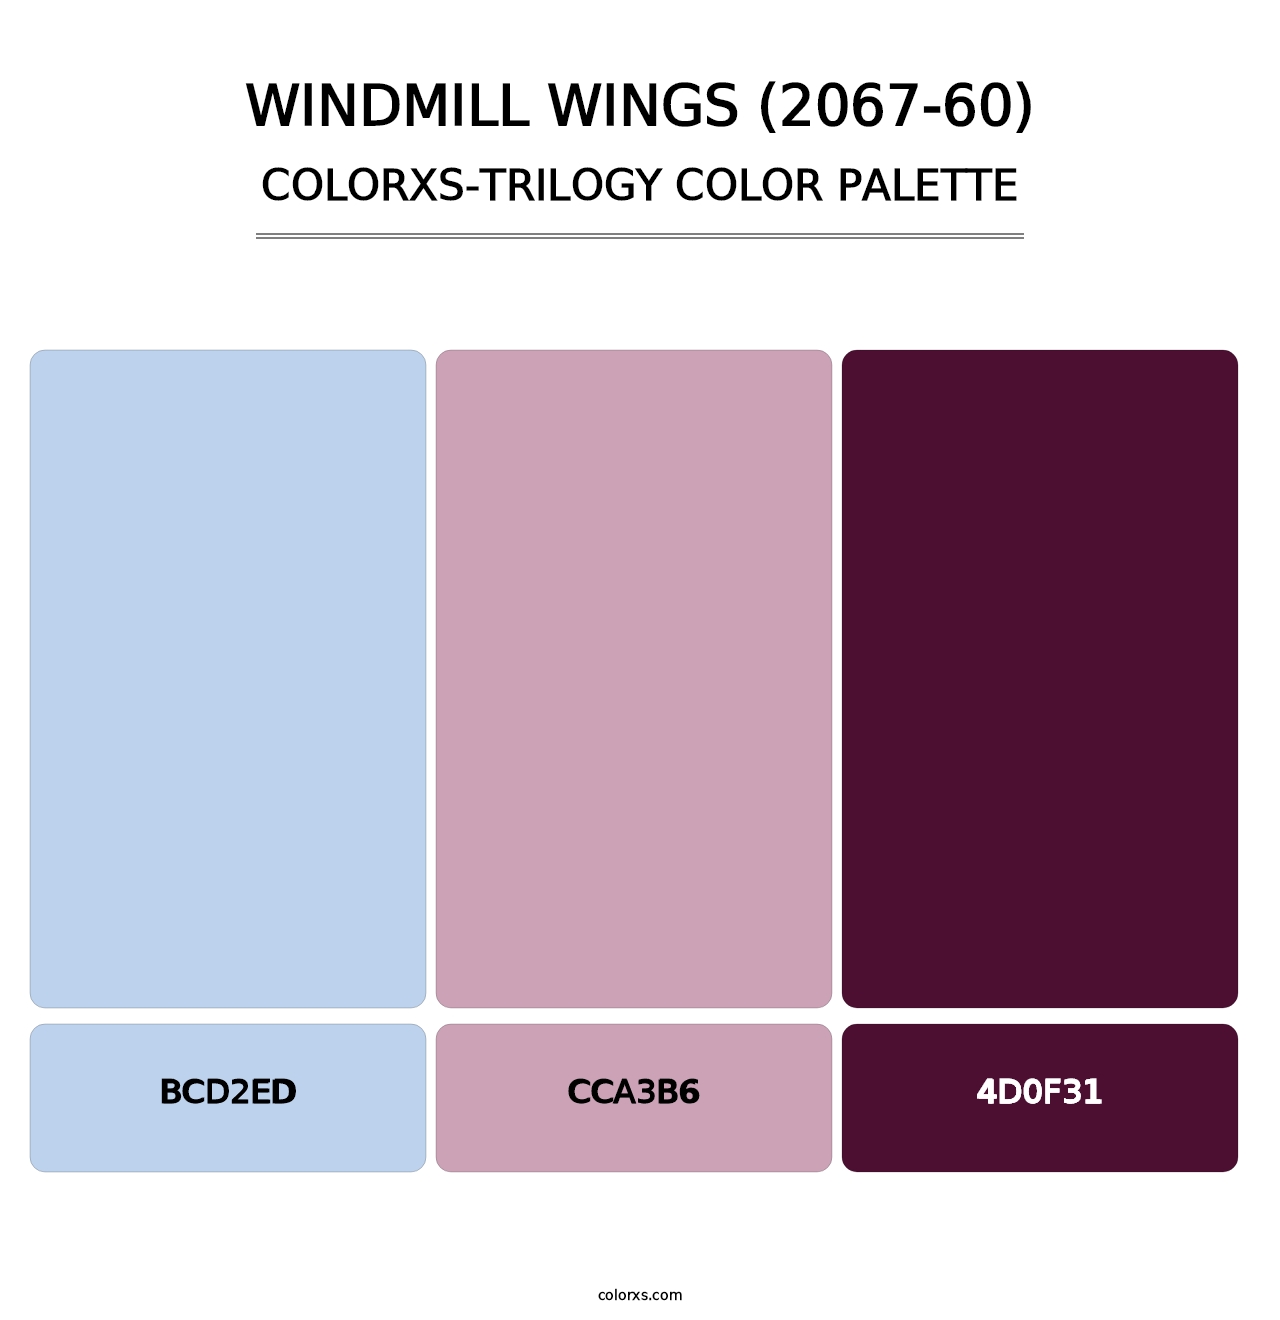 Windmill Wings (2067-60) - Colorxs Trilogy Palette